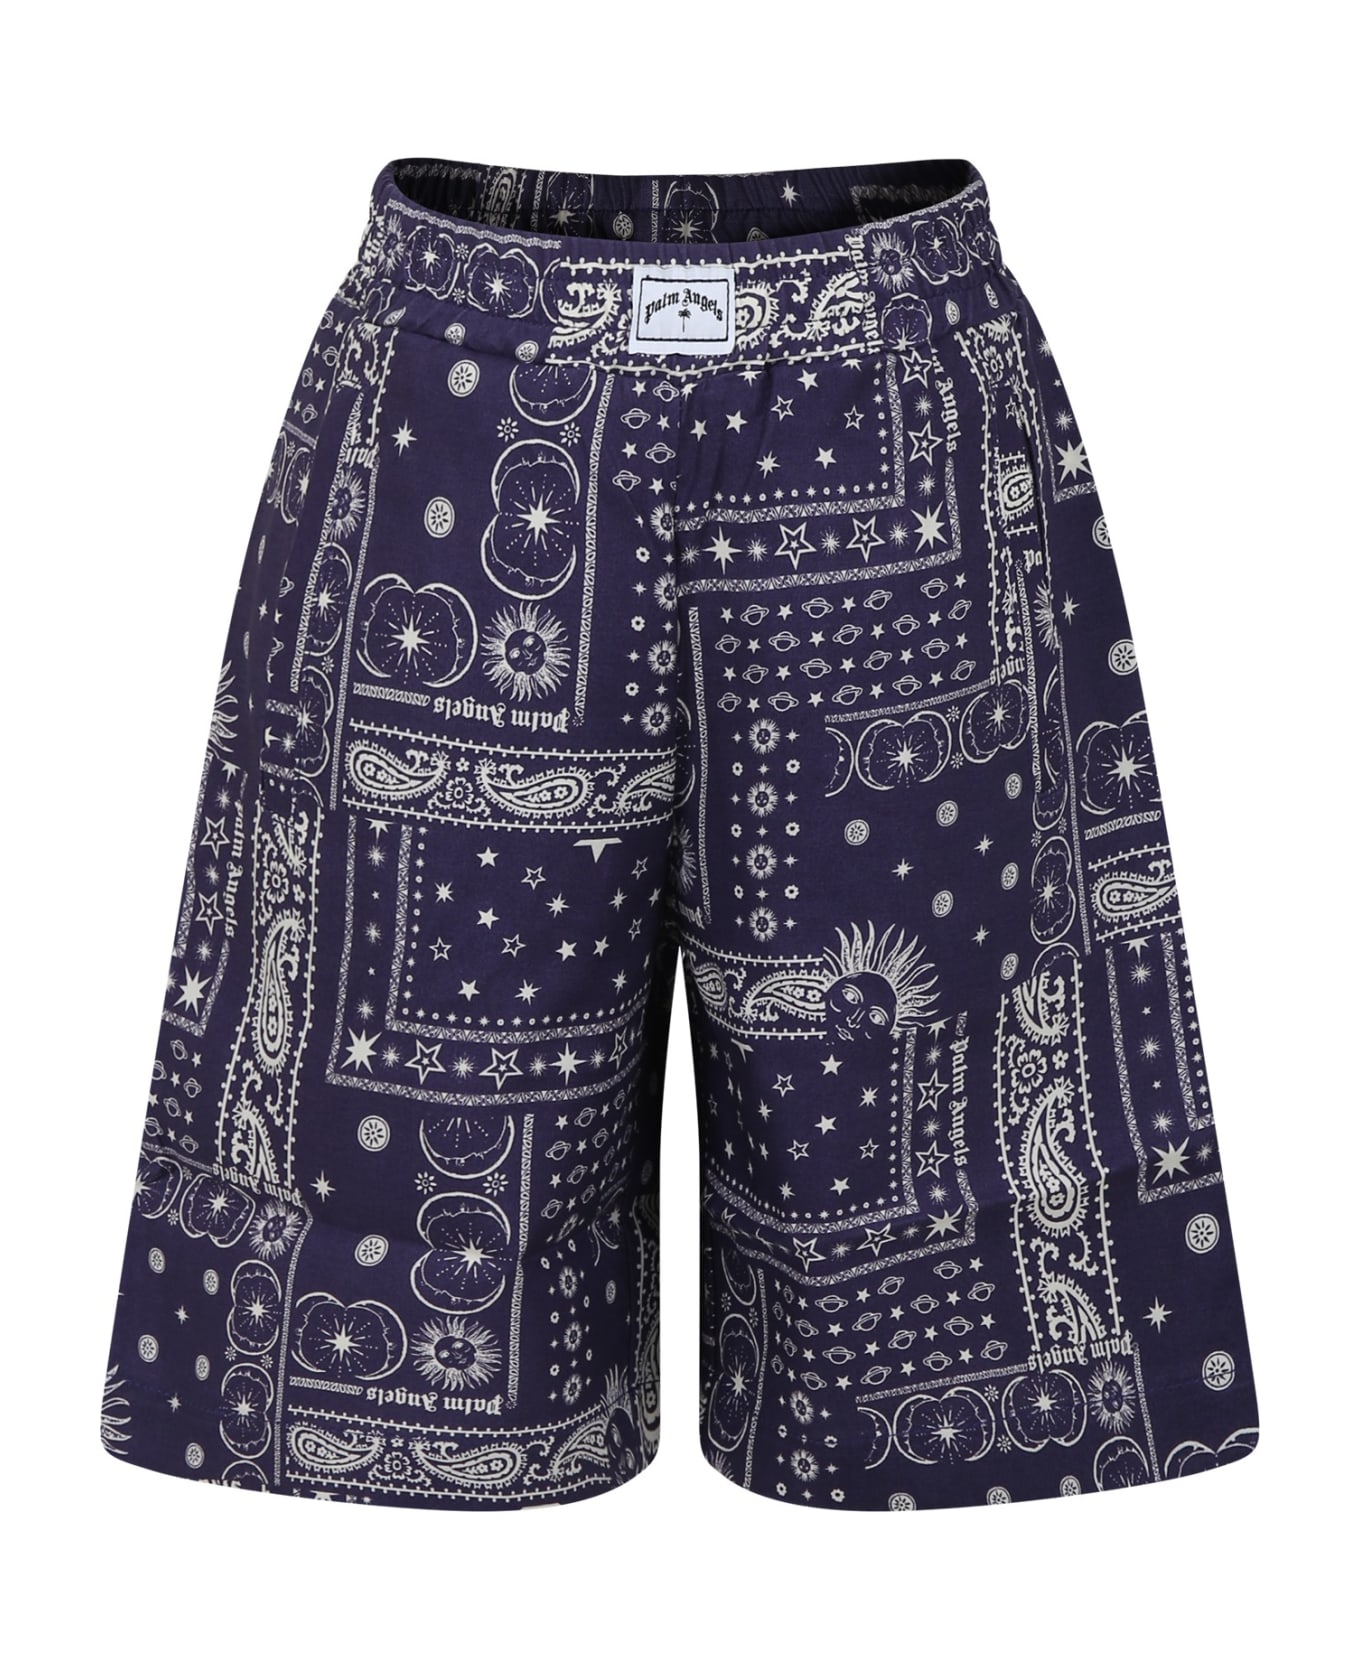 Palm Angels Blue Shorts For Boy With Print - BLUE/WHITE